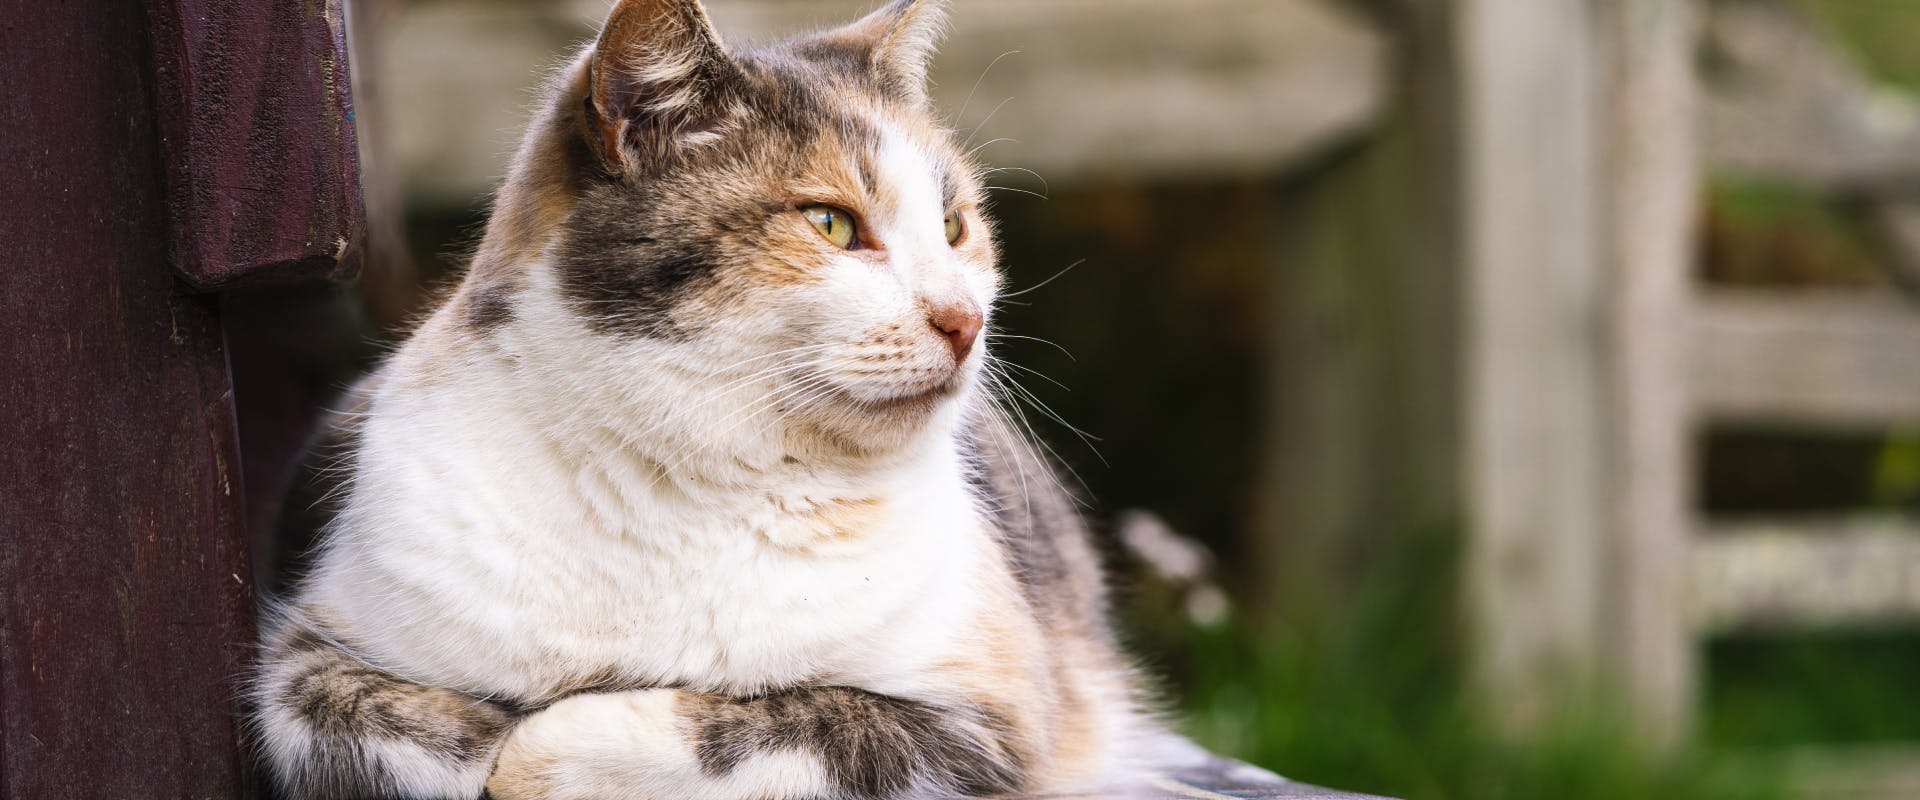 domestic shorthair calico cat sitting on a bench outside in a garden